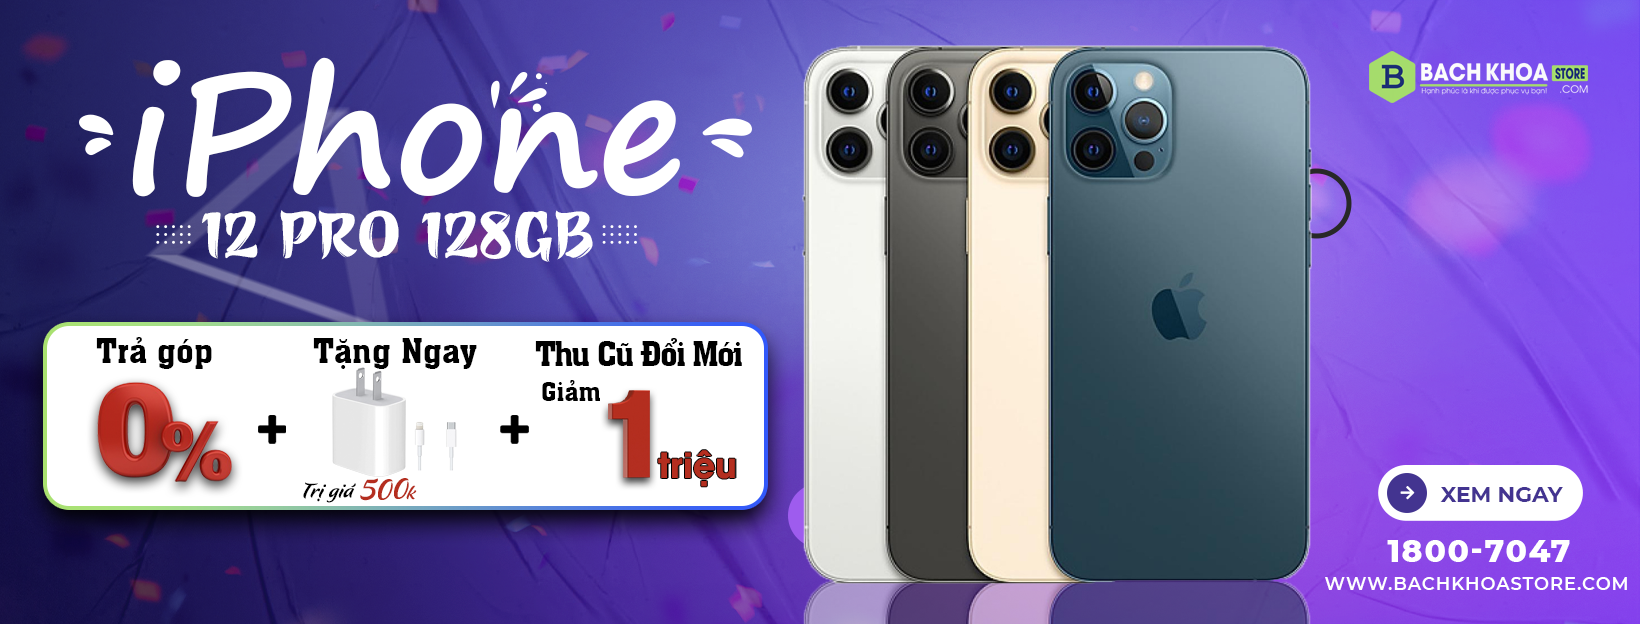 Deal sốc tháng 8<br>iPhone 12 Pro